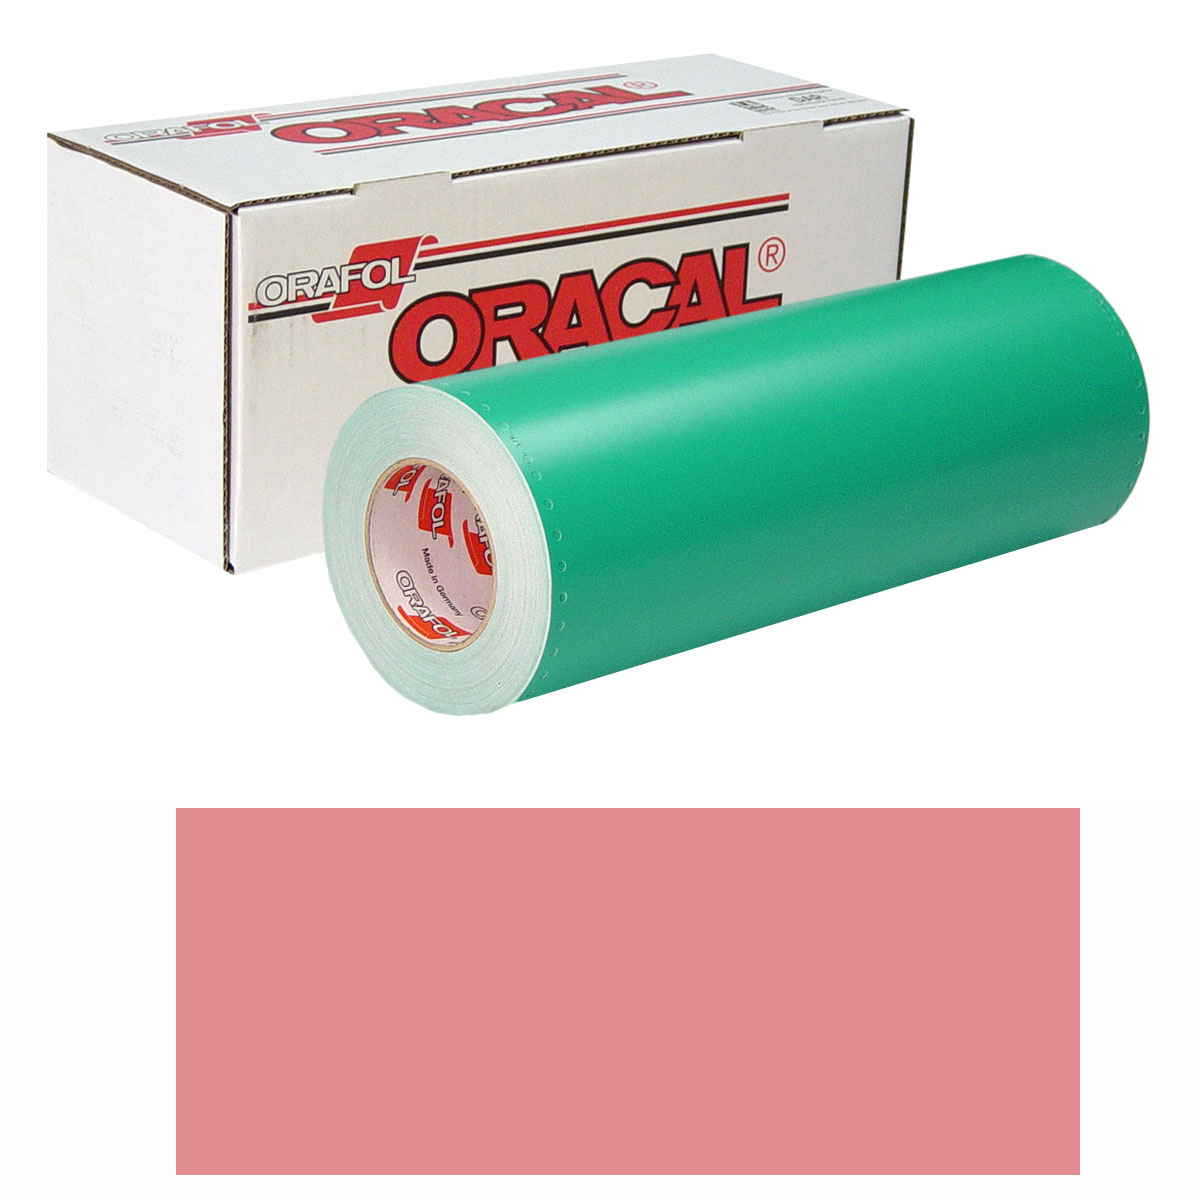 ORACAL 8500 15in X 10yd 085 Pale Pink